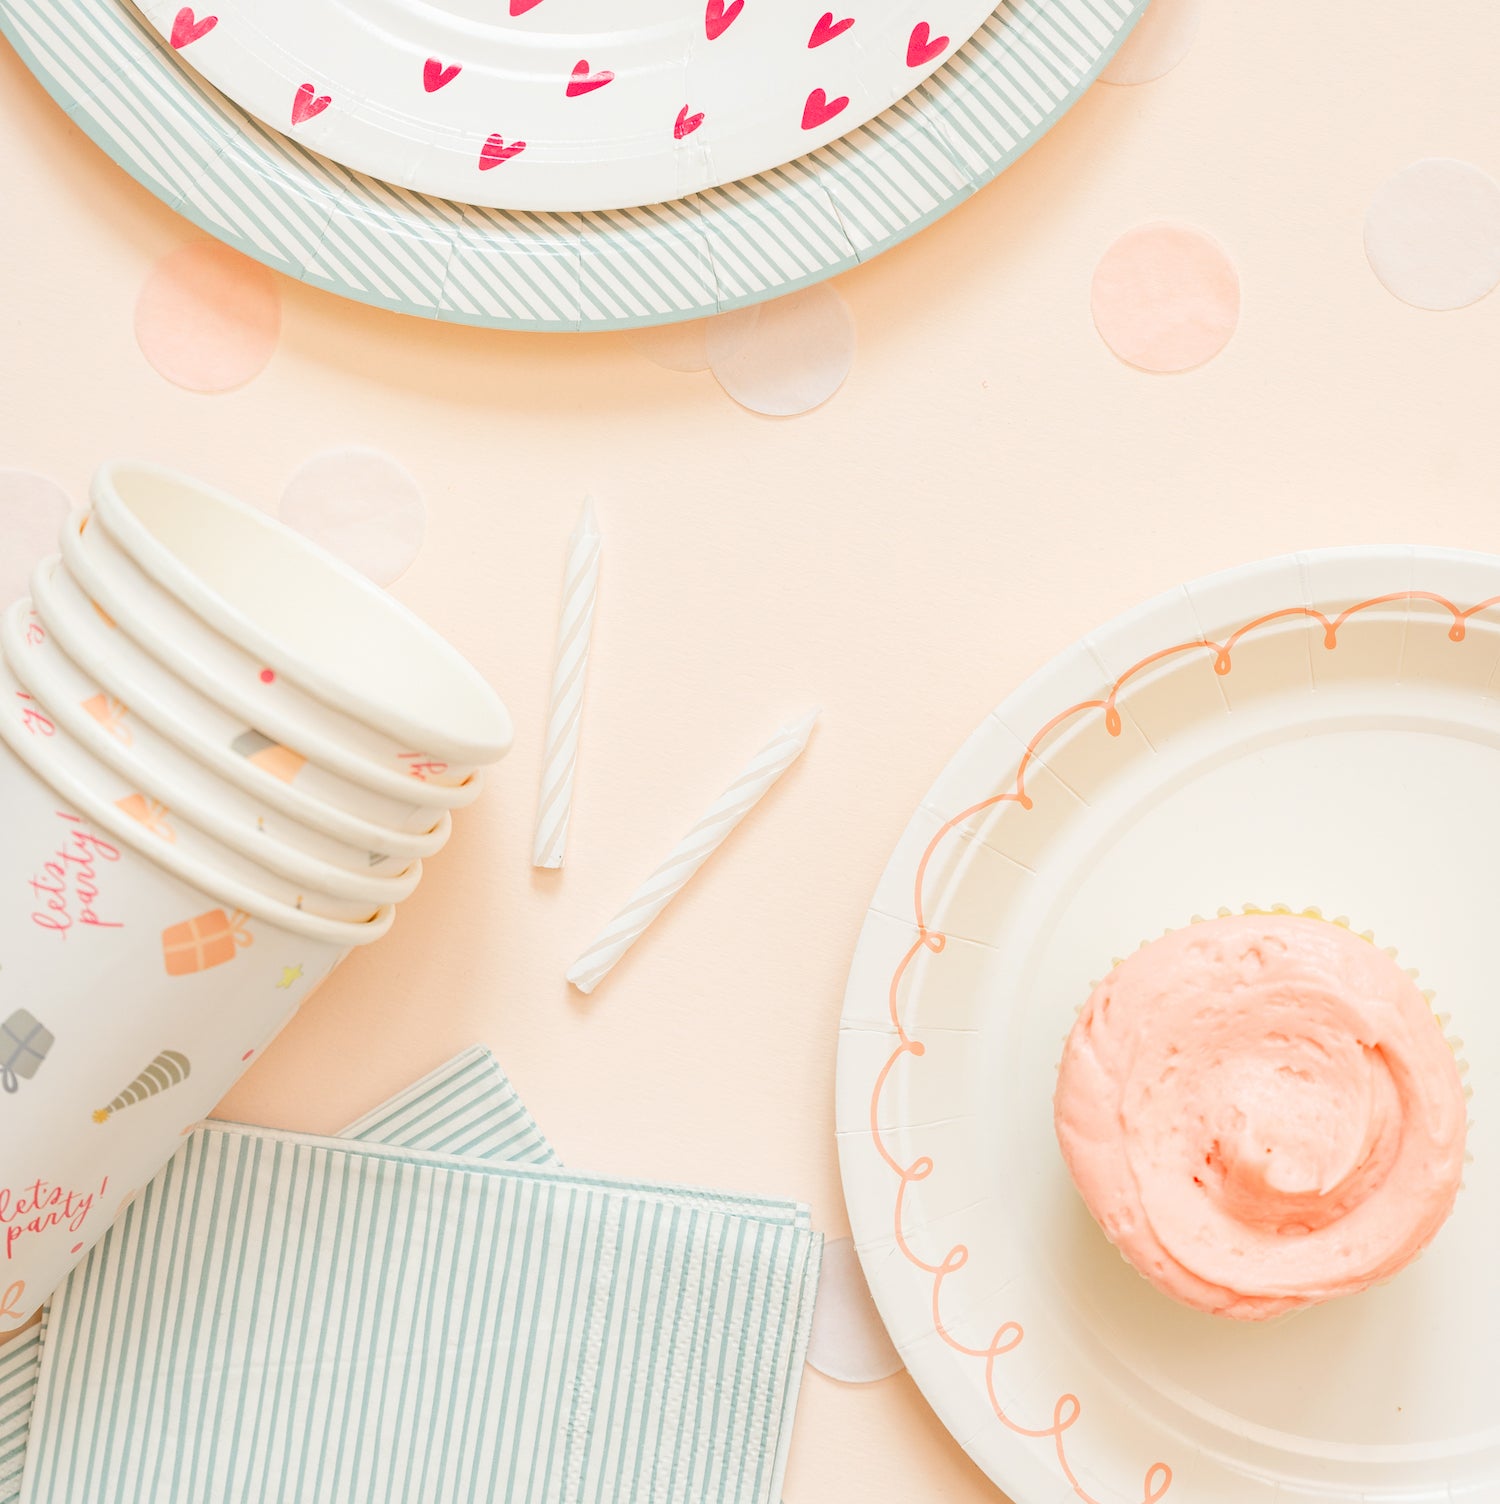 stack of birthday party cups on party table with cupcake